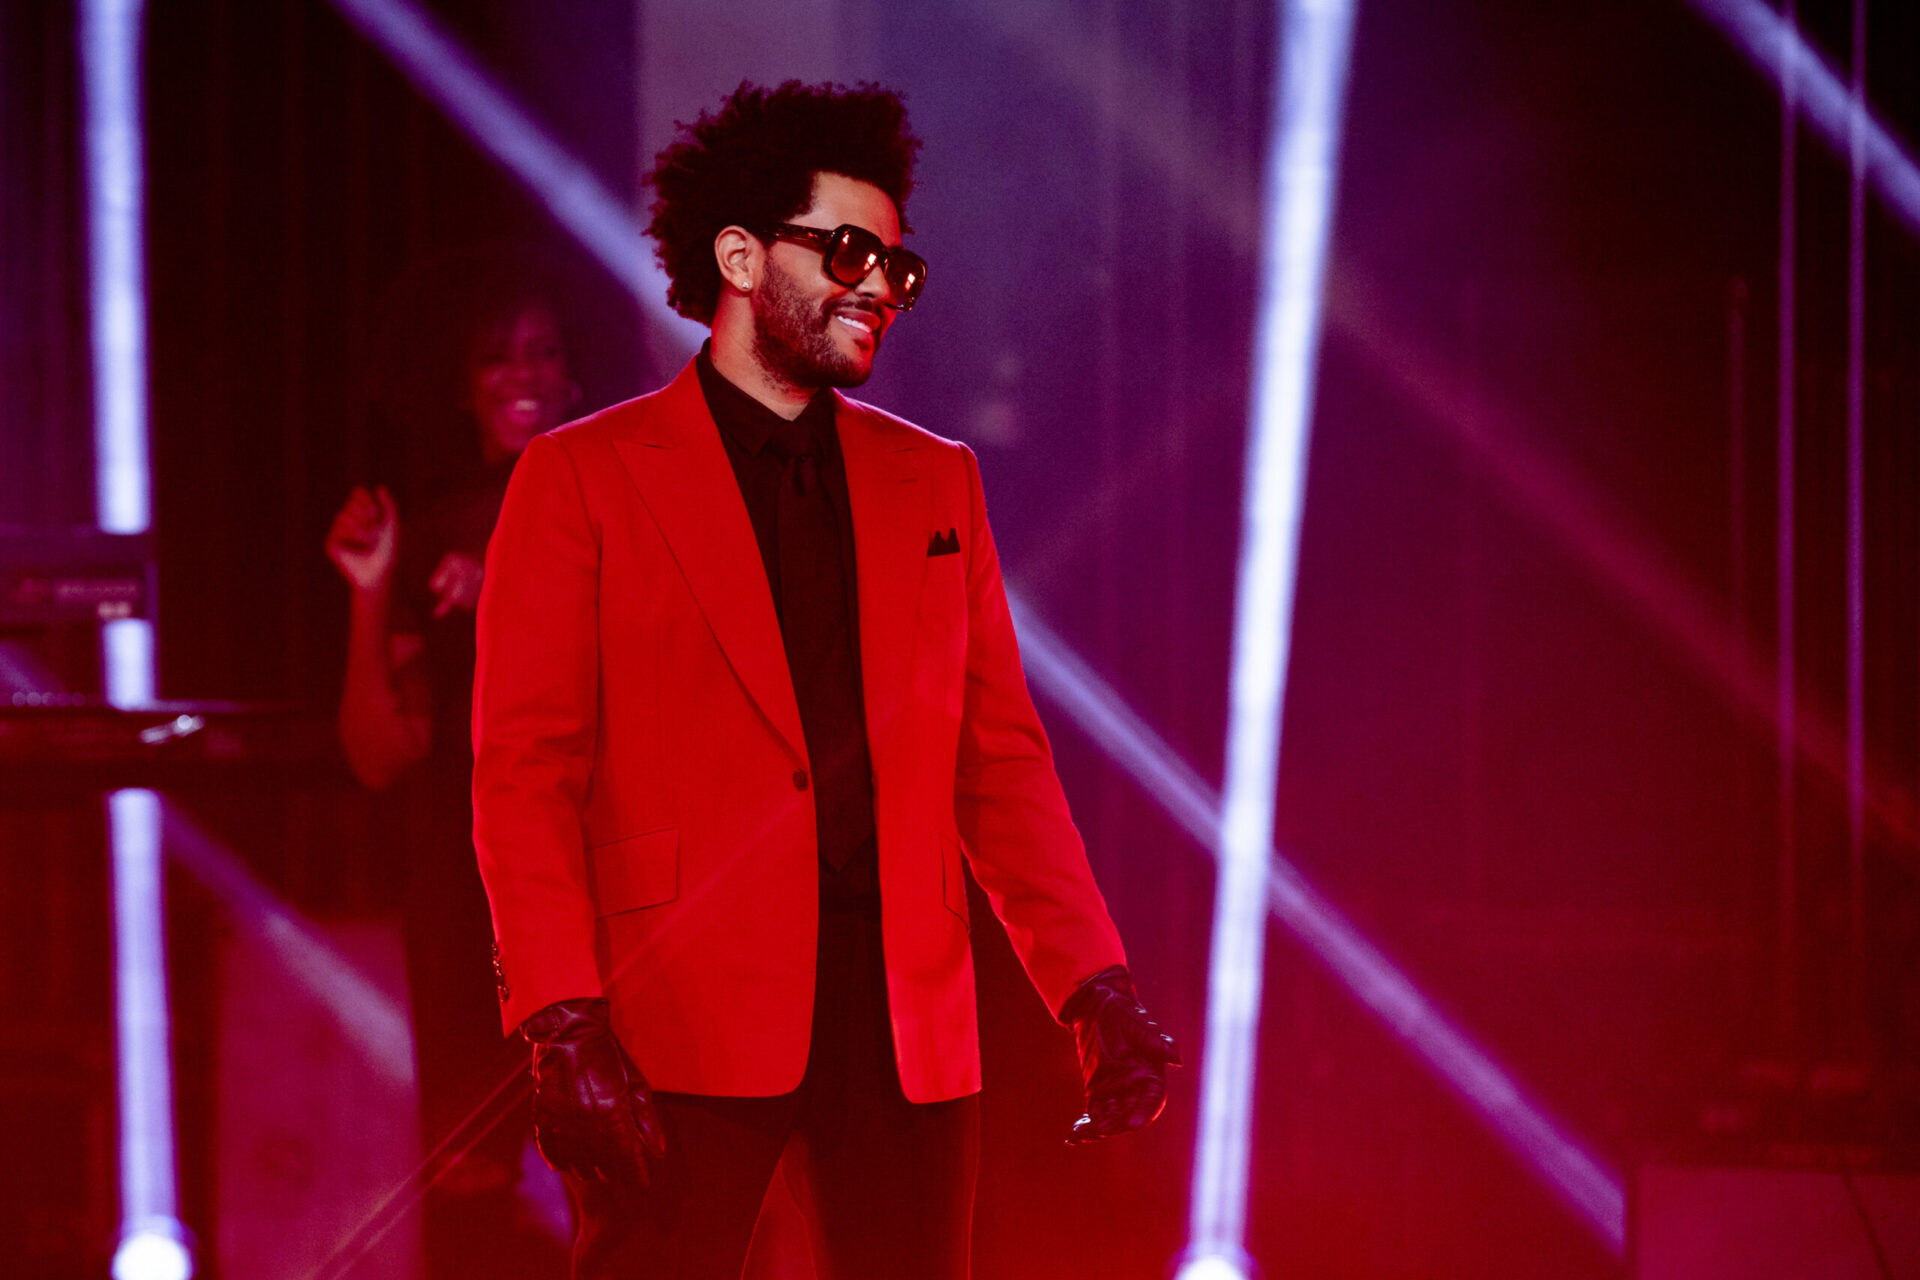 The Weeknd will likely only make one more album as The Weeknd, he told W Magazine.